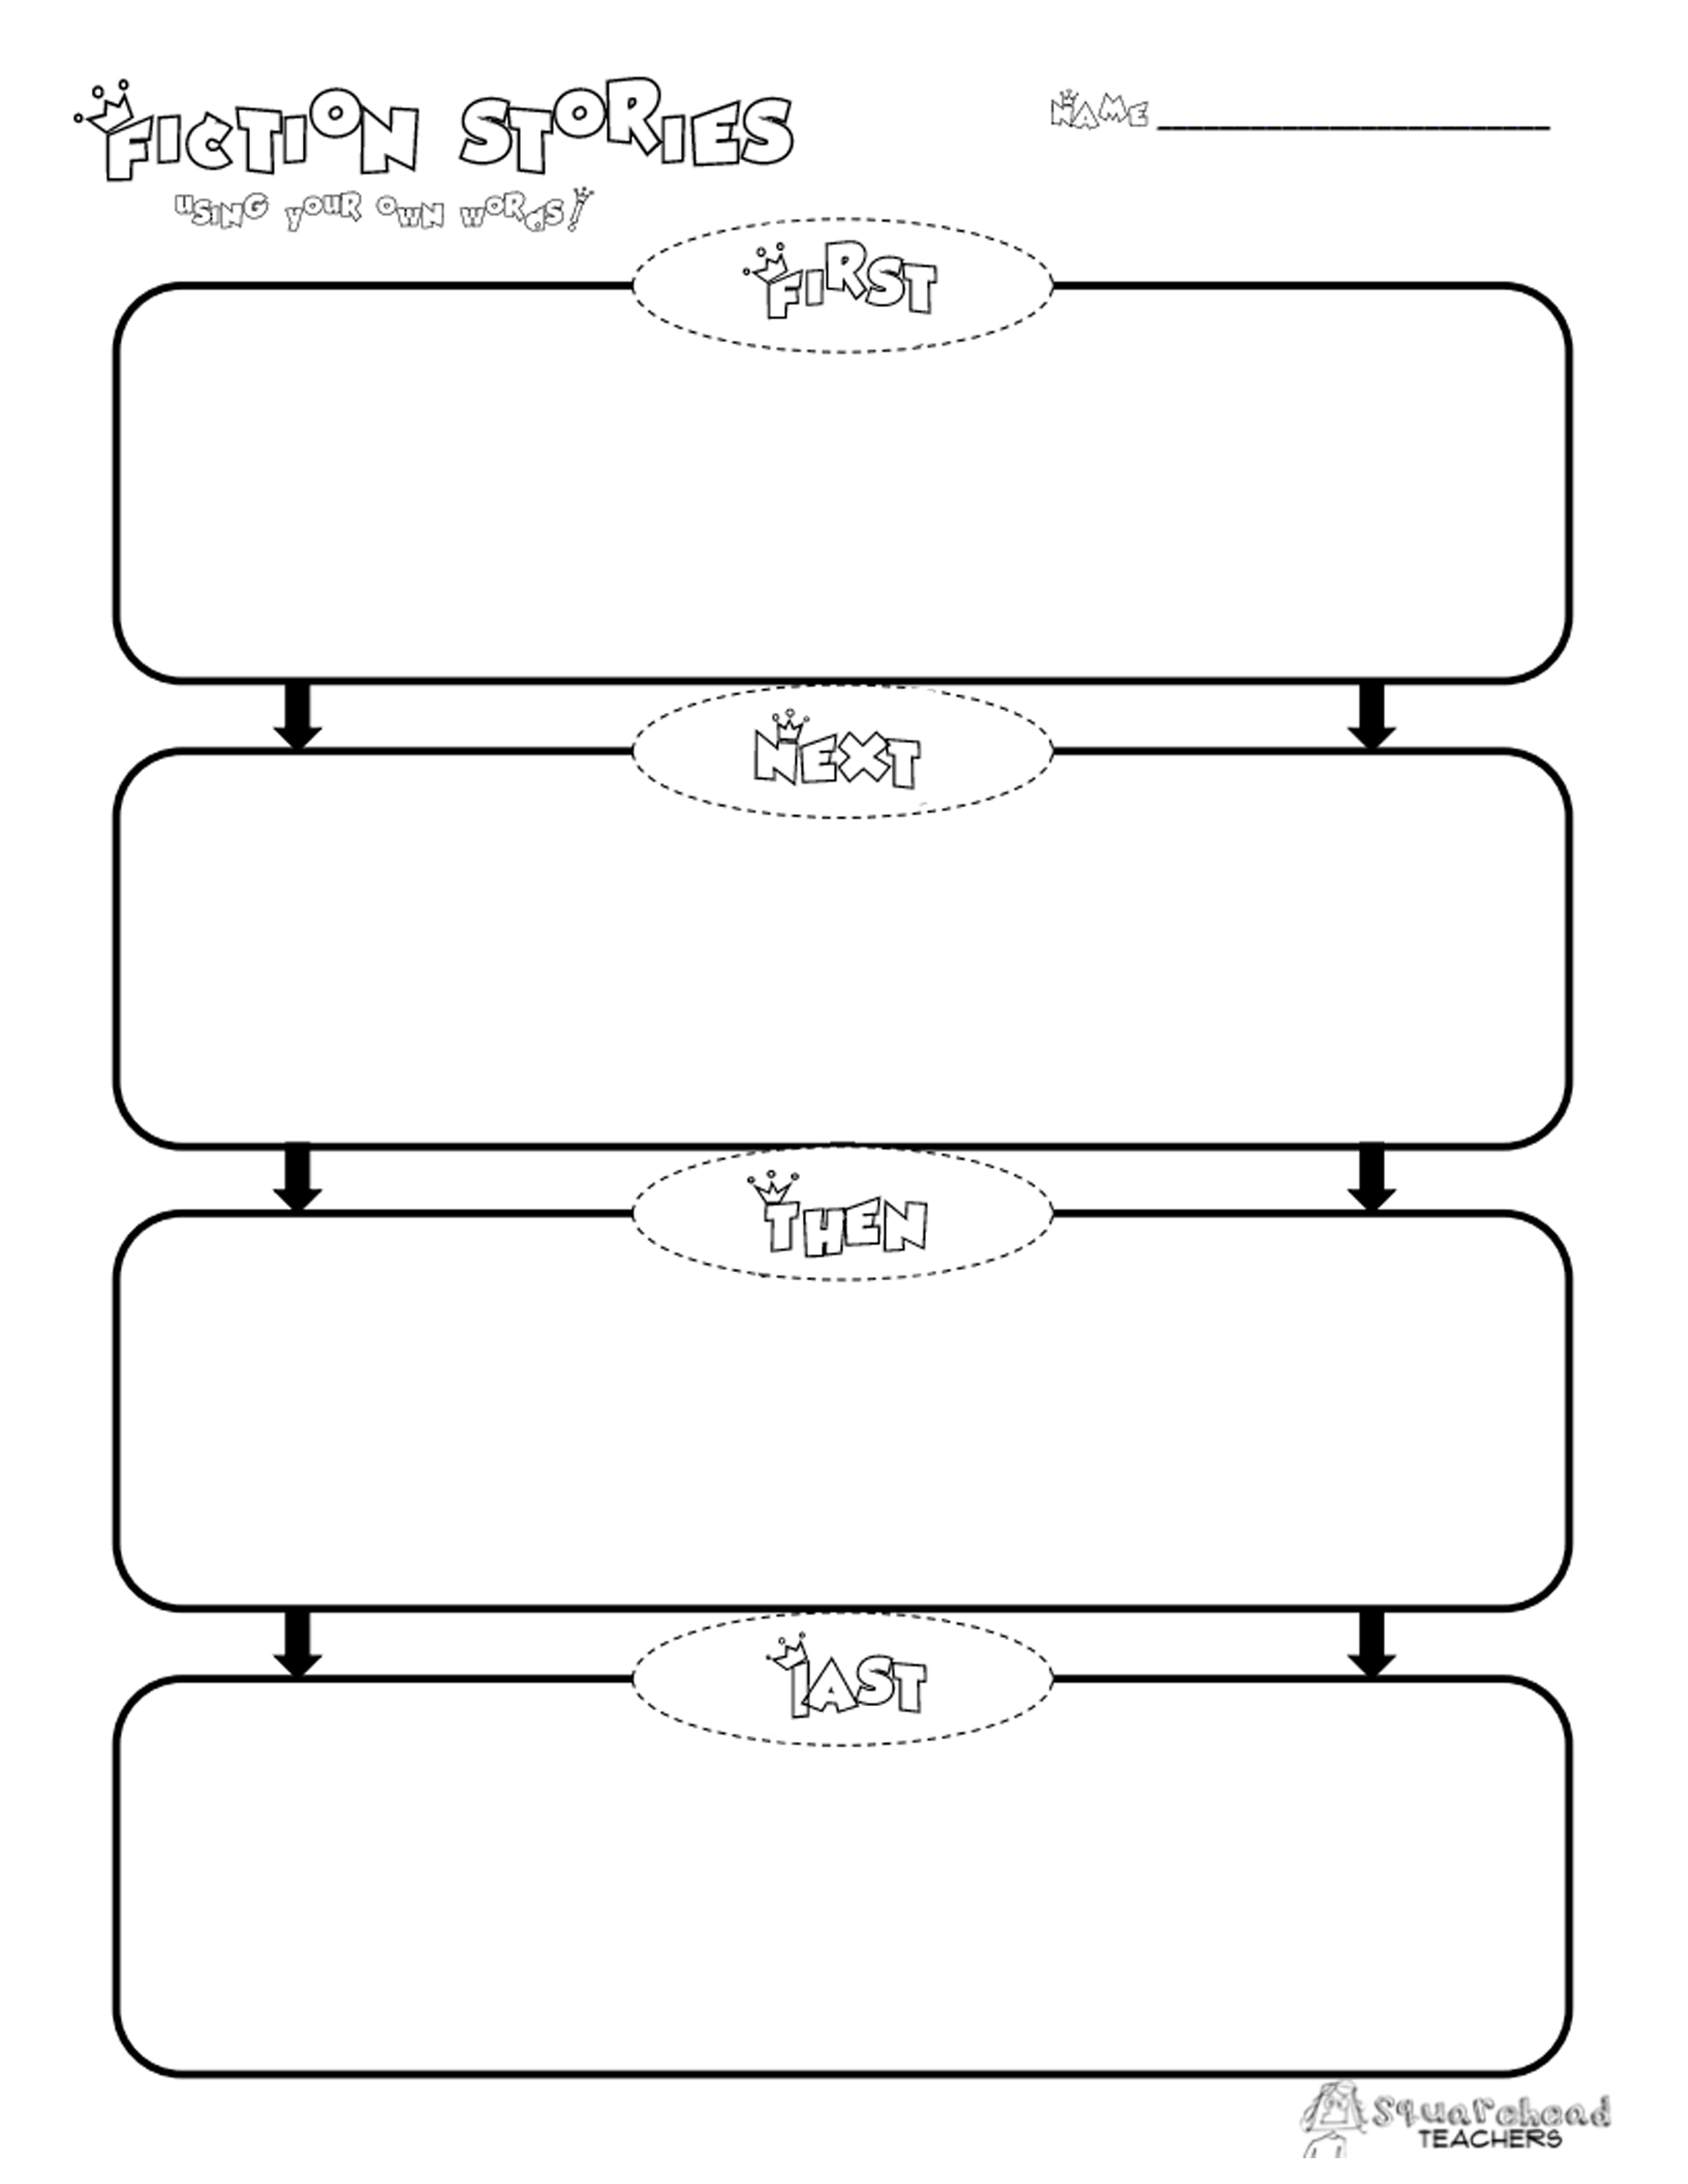 15 Graphic Organizers For Teachers Images Teaching Graphic Organizers Plot Chart Graphic 